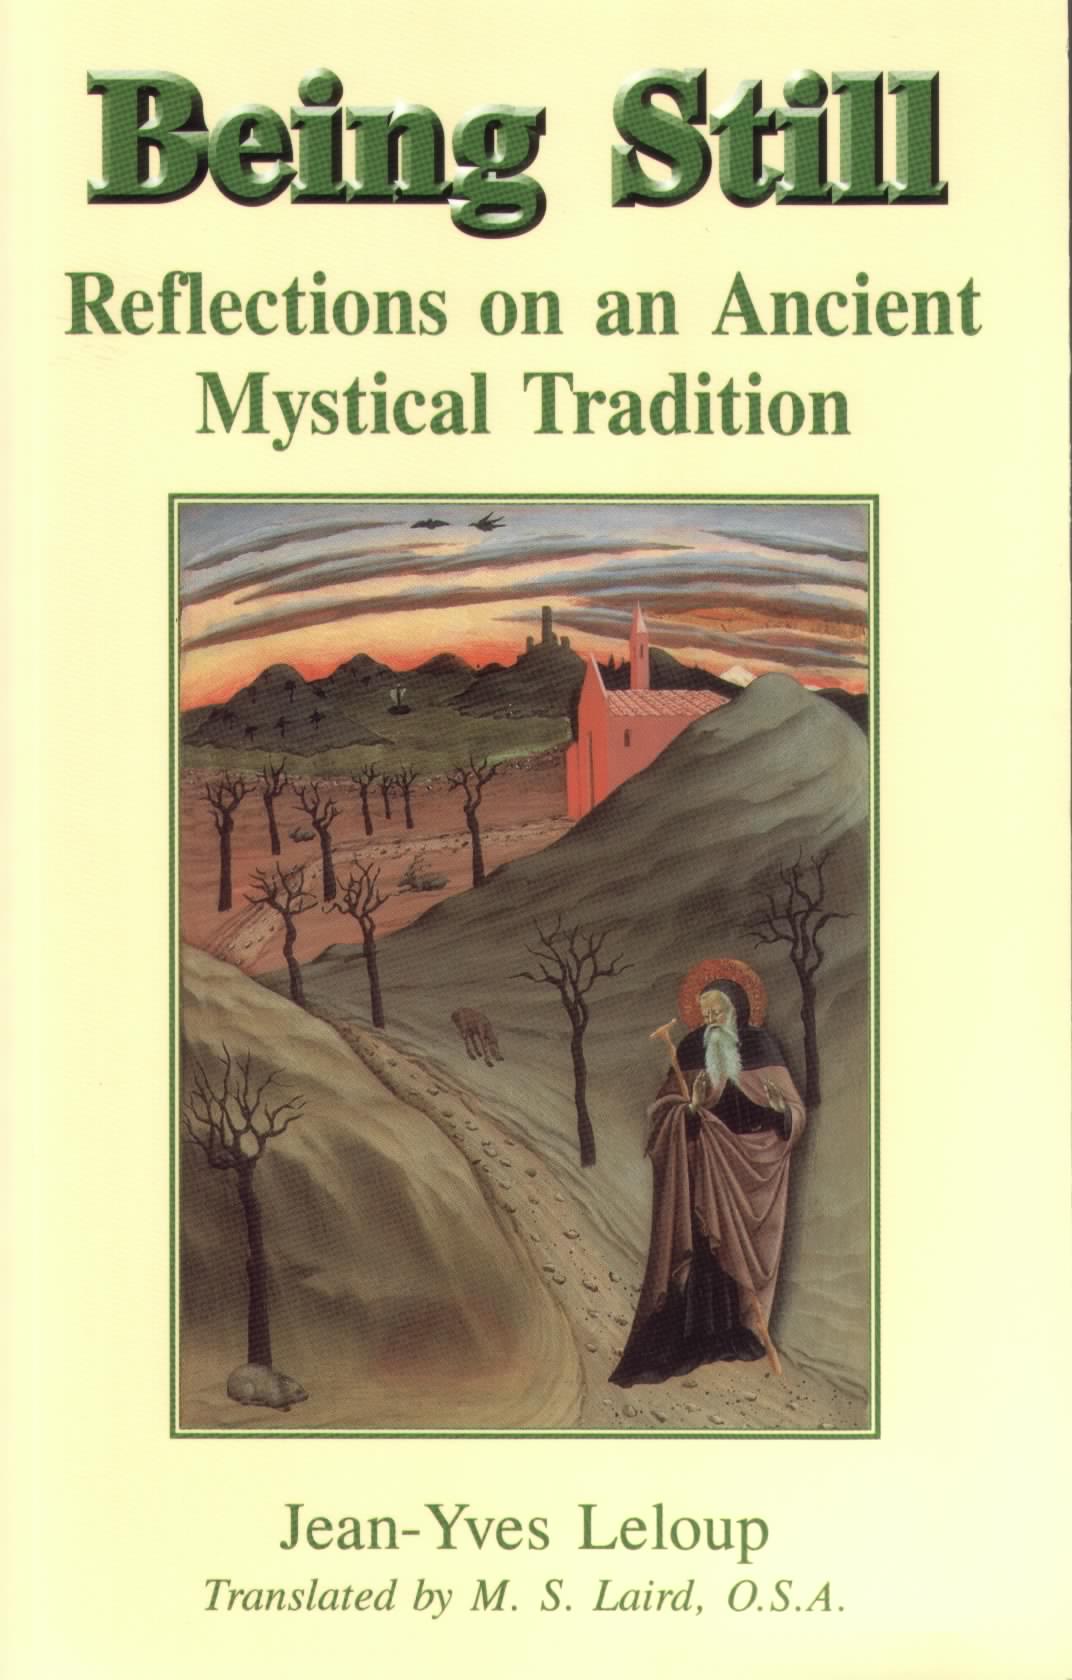 Being Still: Reflections on an Ancient Mystical Tradition / Jean-Yves Leloup